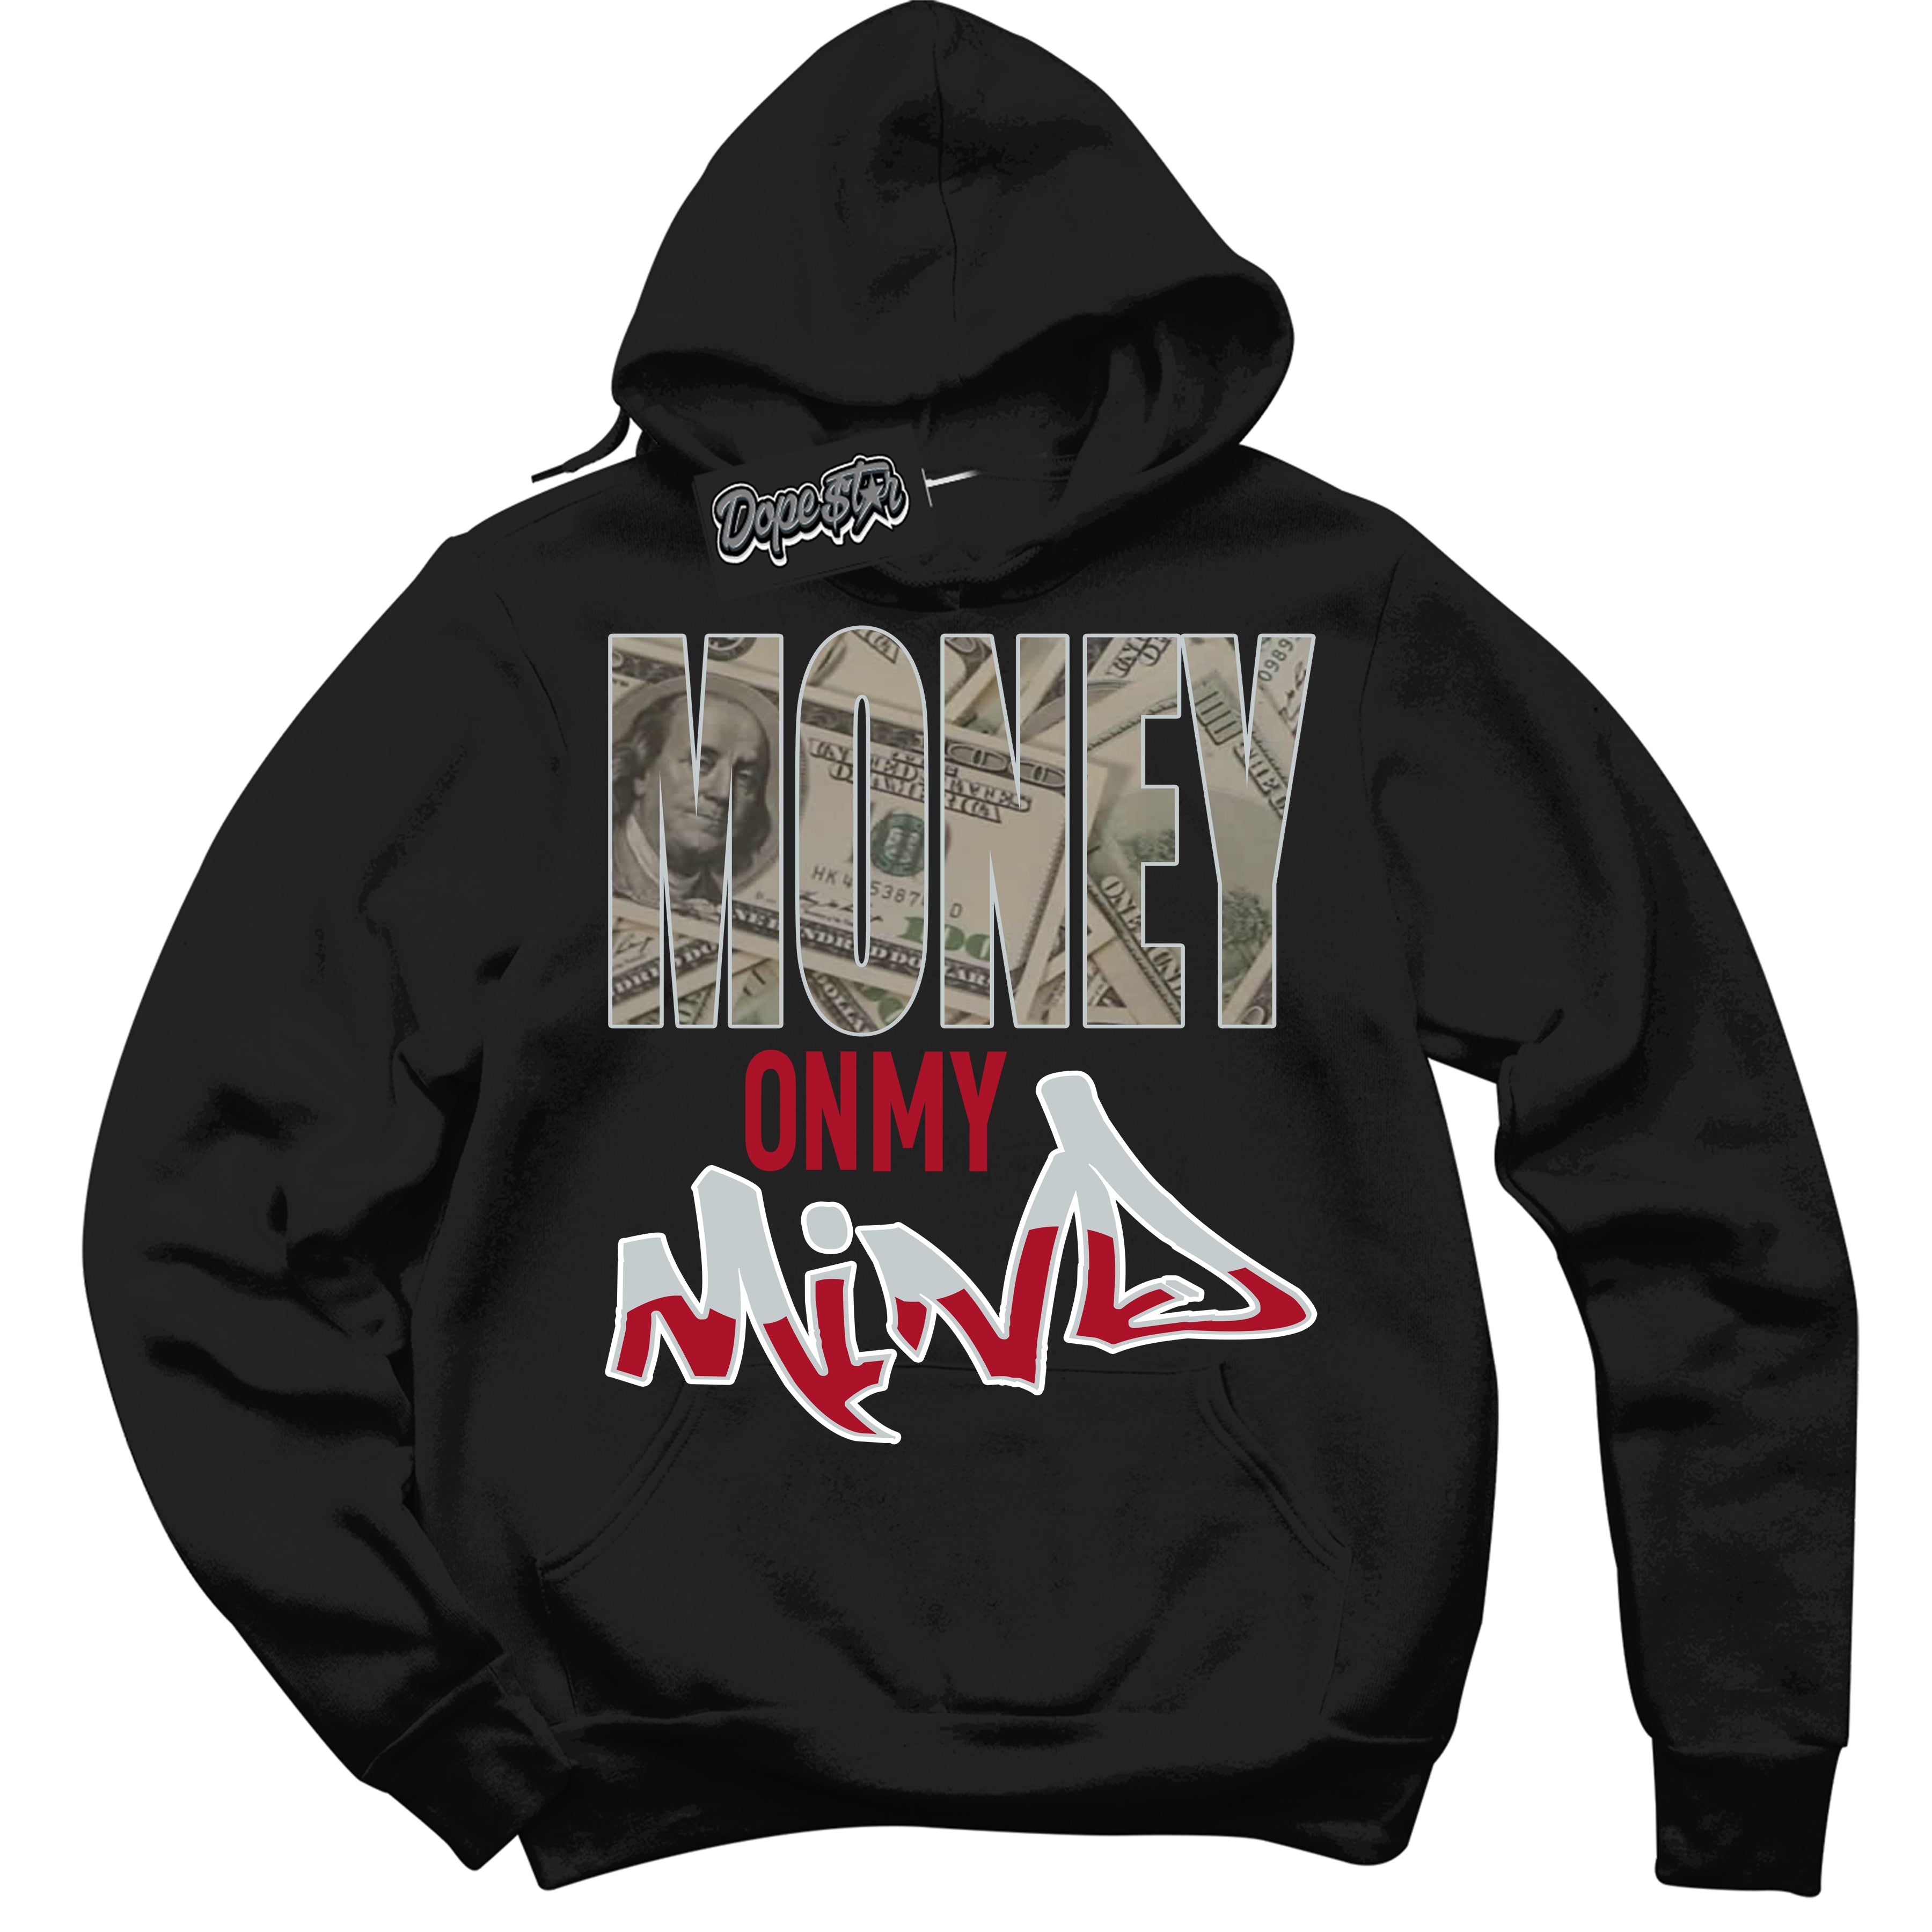 Cool Black Hoodie with “ Money On My Mind ”  design that Perfectly Matches  Reverse Ultraman Sneakers.